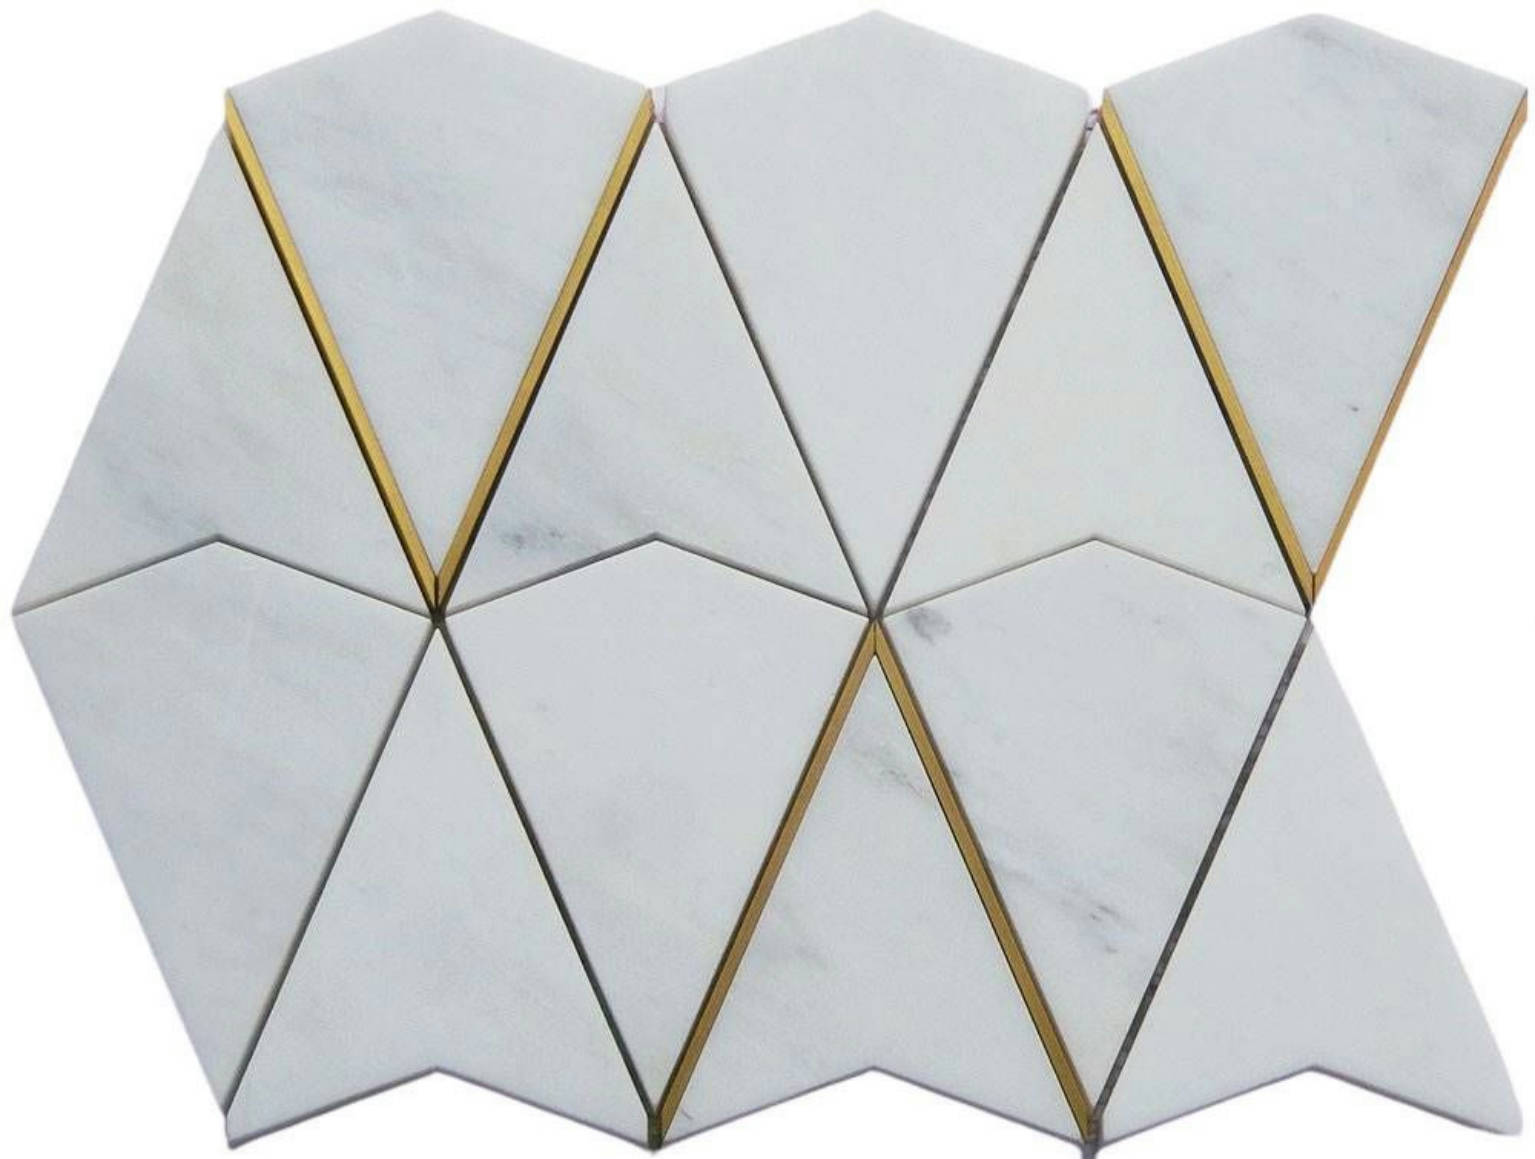 Veronese | Stones & More | Finest selection of Mosaics, Glass, Tile and Stone